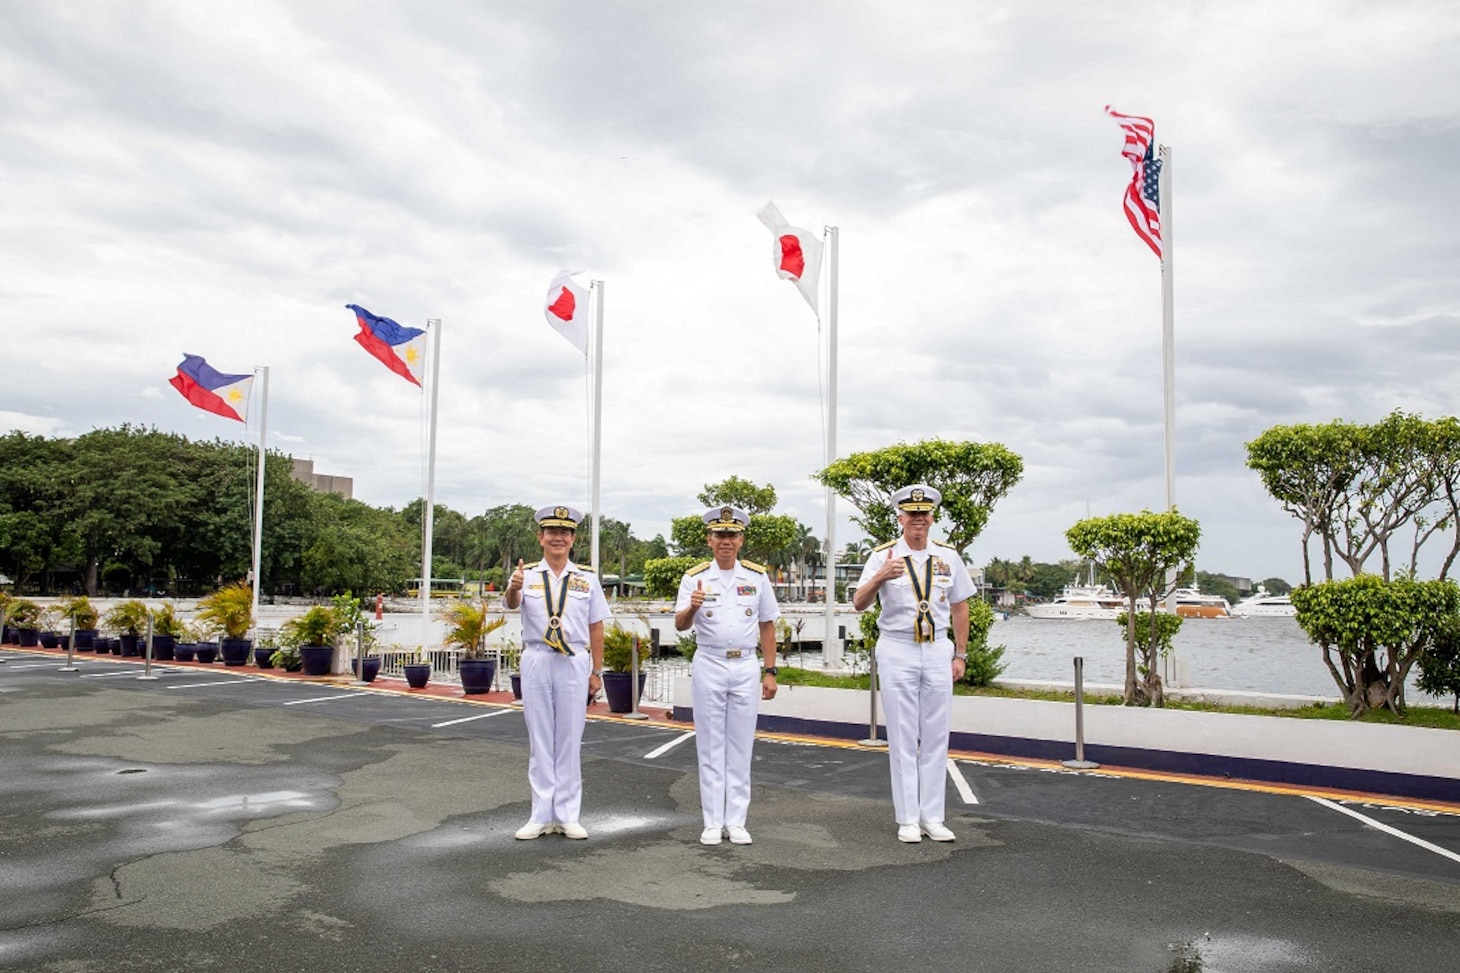 Japan Maritime Self-Defense Force Commander-in-Chief Self-Defense Fleet Vice Adm. SAITO Akira; Philippine Fleet Commander Rear Adm. Renato David; and Commander U.S. 7th Fleet Vice Admiral Karl Thomas pose for a photo in Manila, Philippines, Aug. 27. U.S. 7th Fleet is the U.S. Navy’s largest forward-deployed numbered fleet, and routinely interacts and operates with allies and partners to preserve a free and open Indo-Pacific.